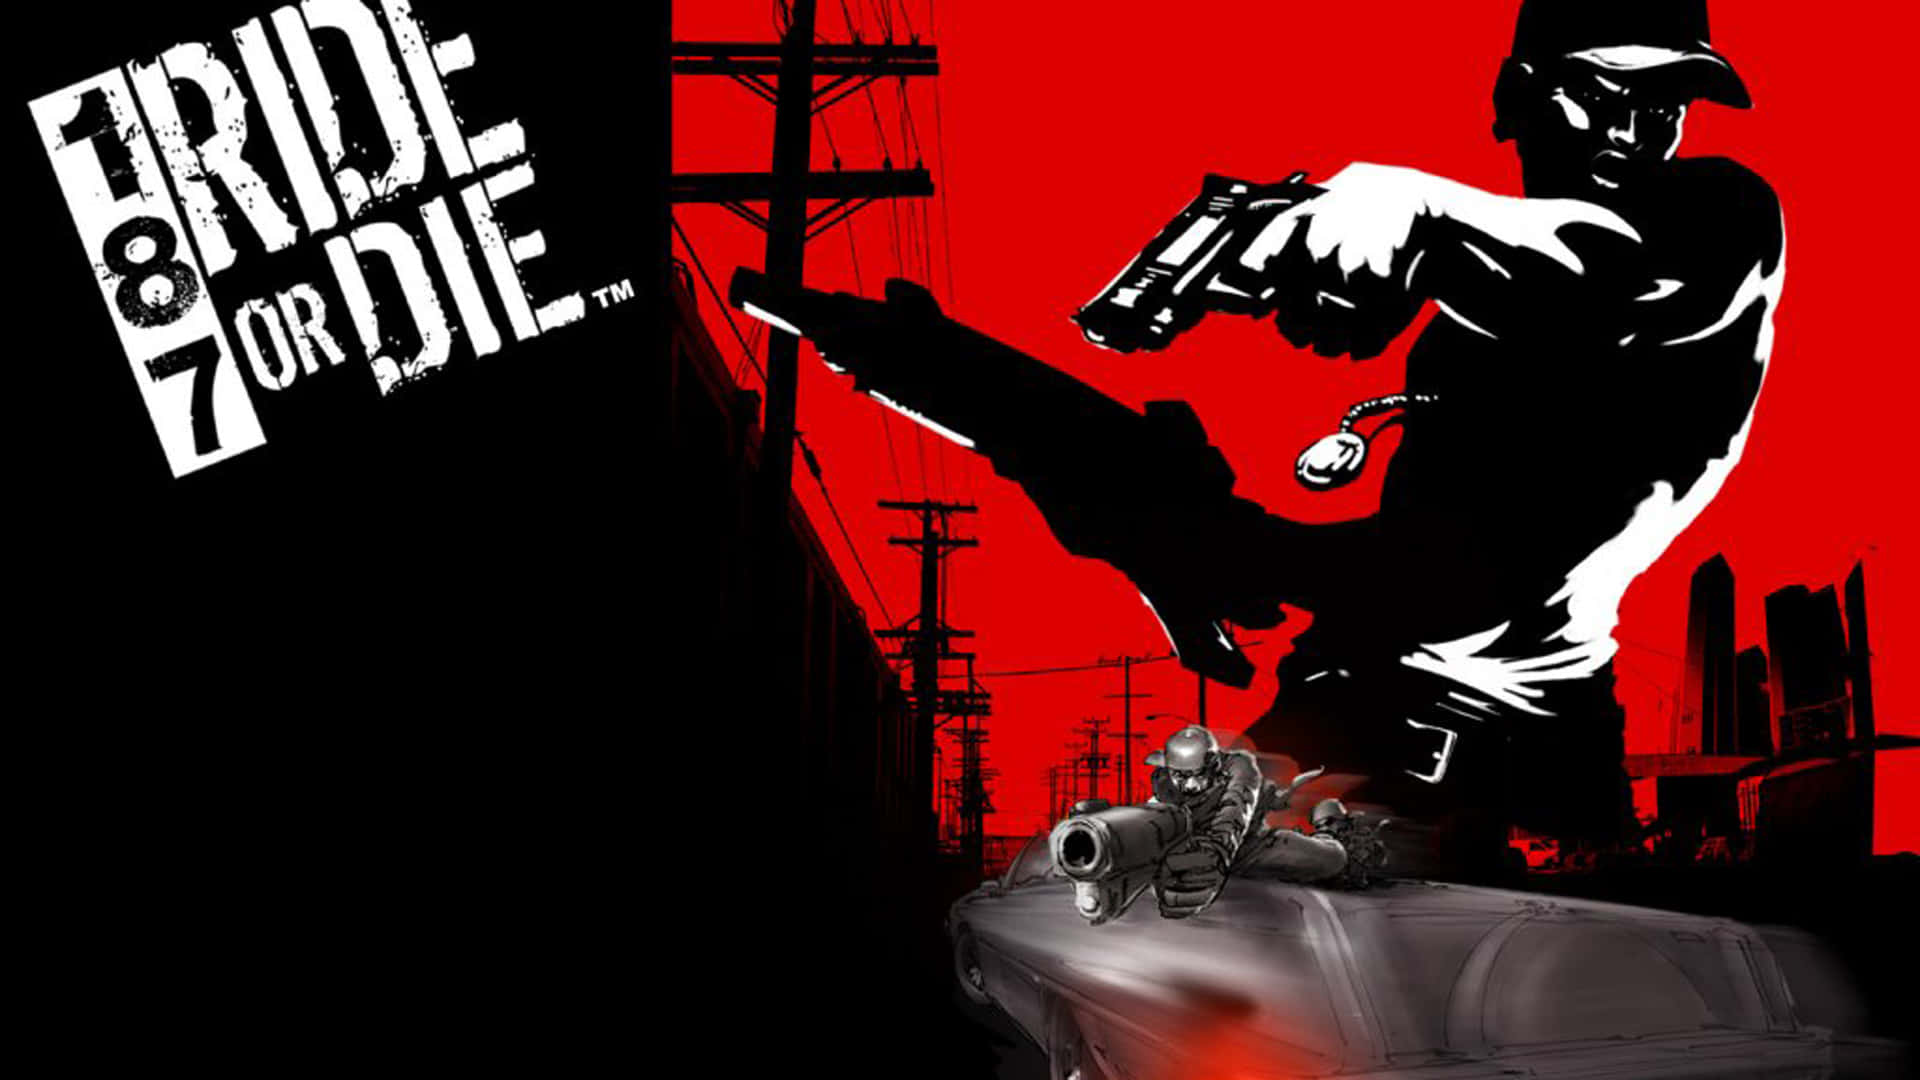 Fast And Furious Ride Or Die Wallpapers  Wallpaper Cave